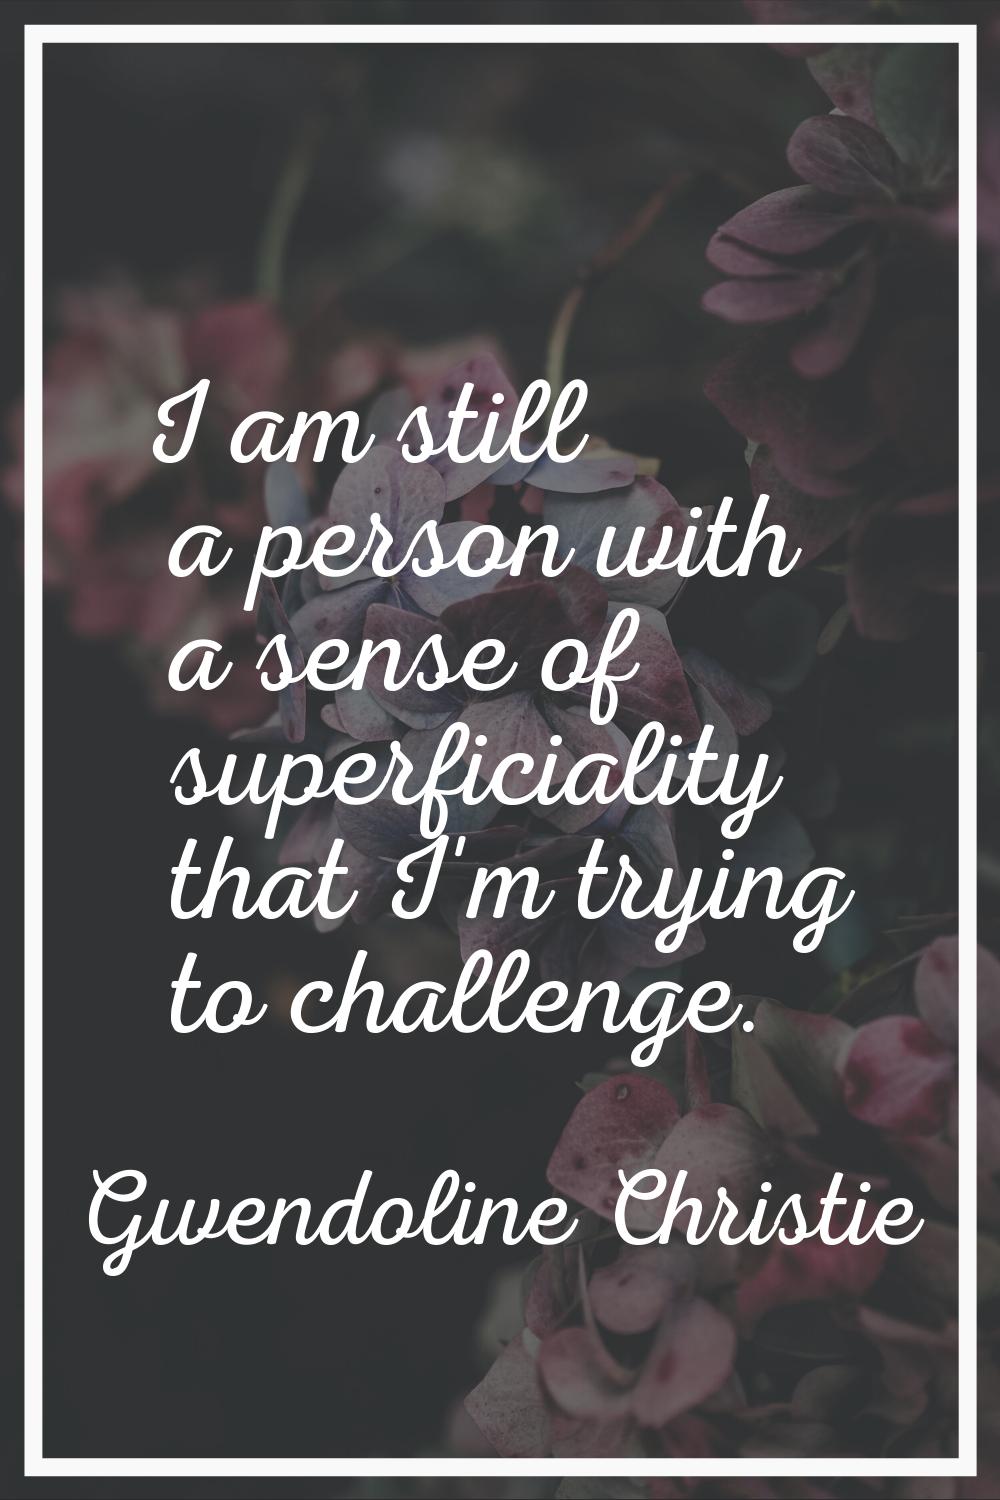 I am still a person with a sense of superficiality that I'm trying to challenge.